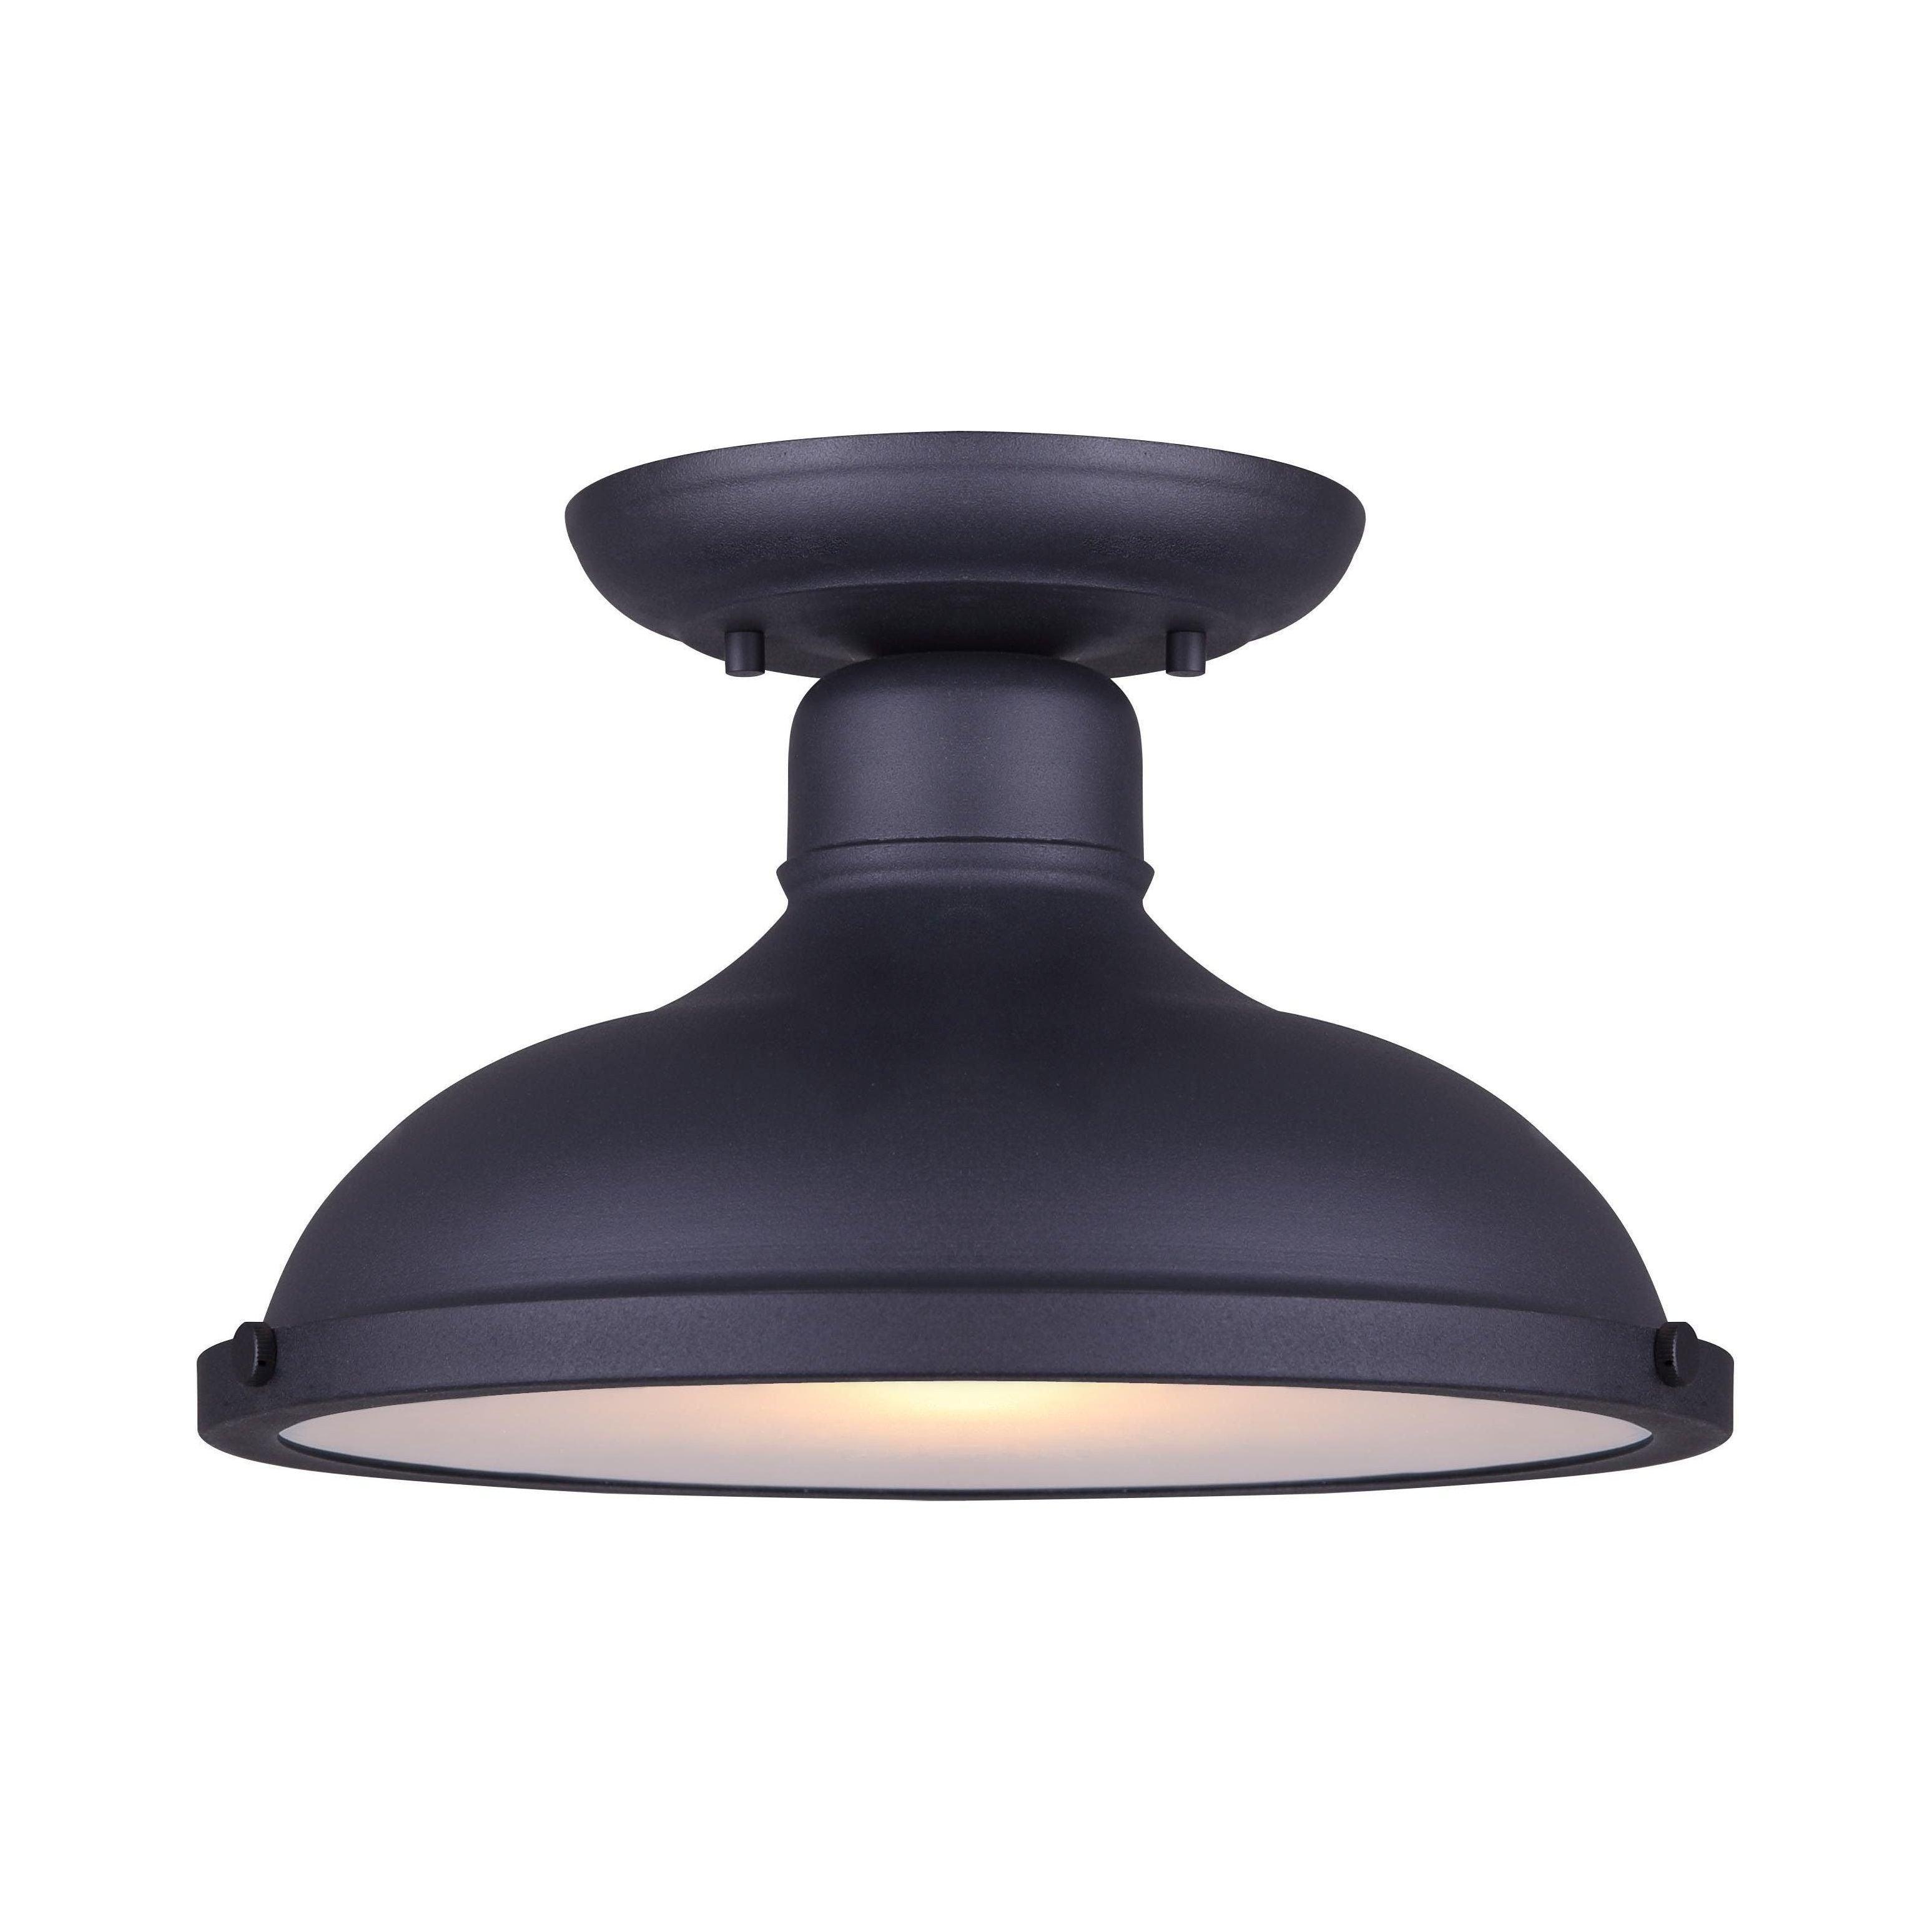 Canarm - Marcella Outdoor Ceiling Light - Lights Canada